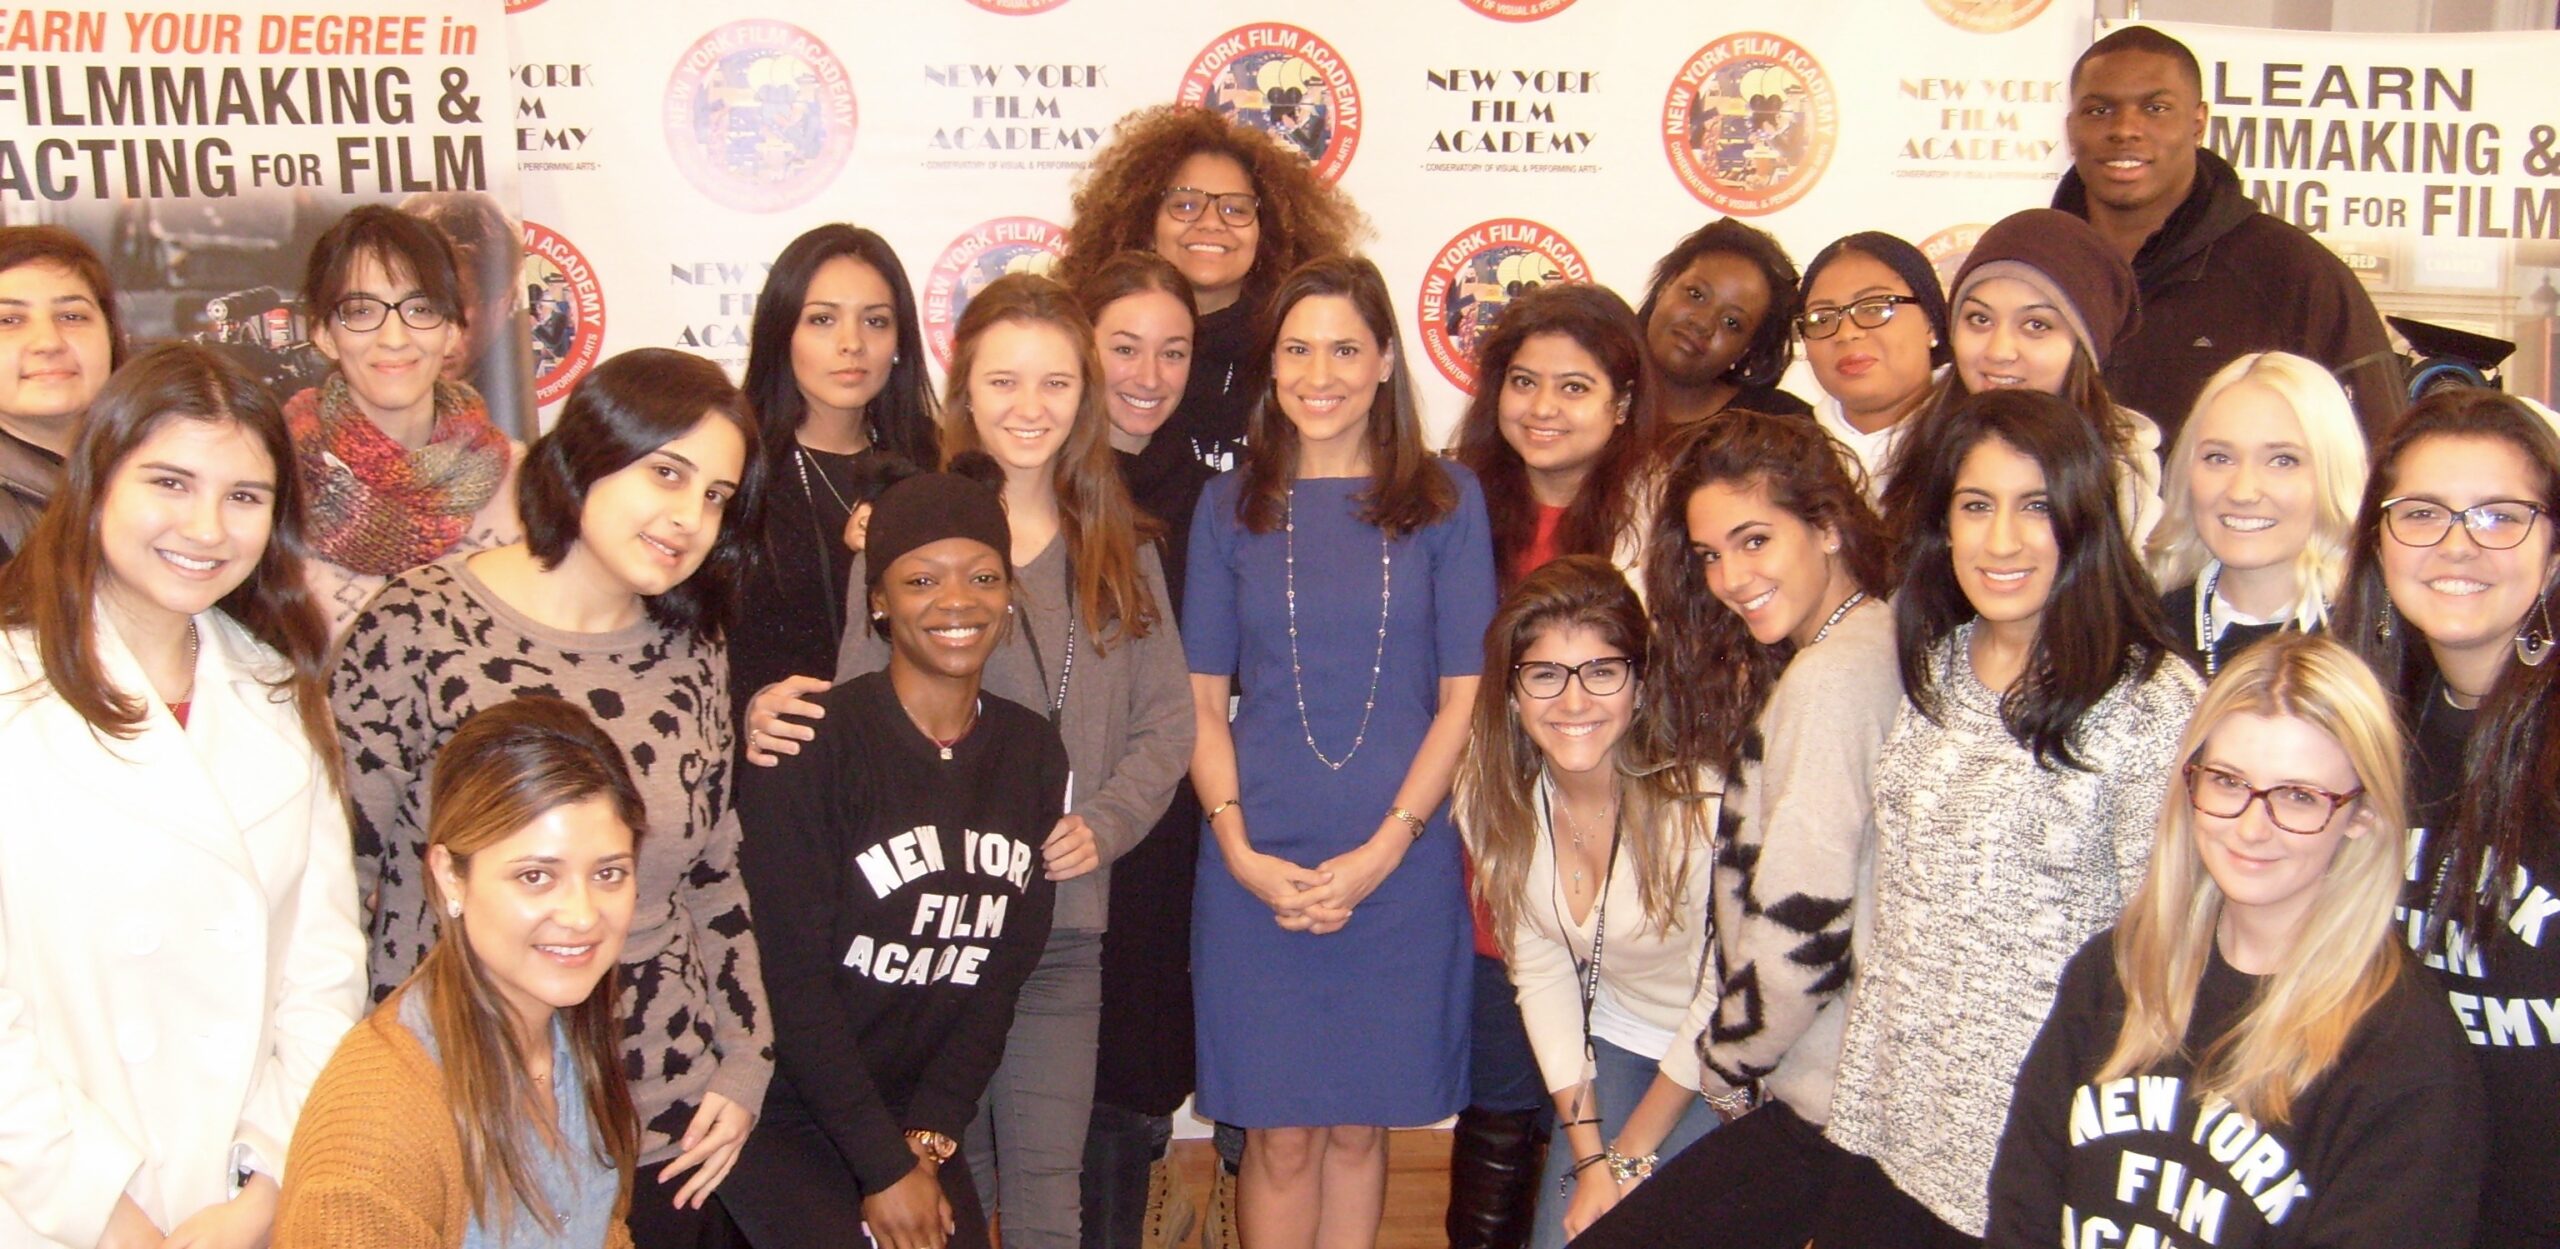 WNBC-TV reporter/anchor Lynda Baquero visited NYFA to meet with the Broadcast Journalism students